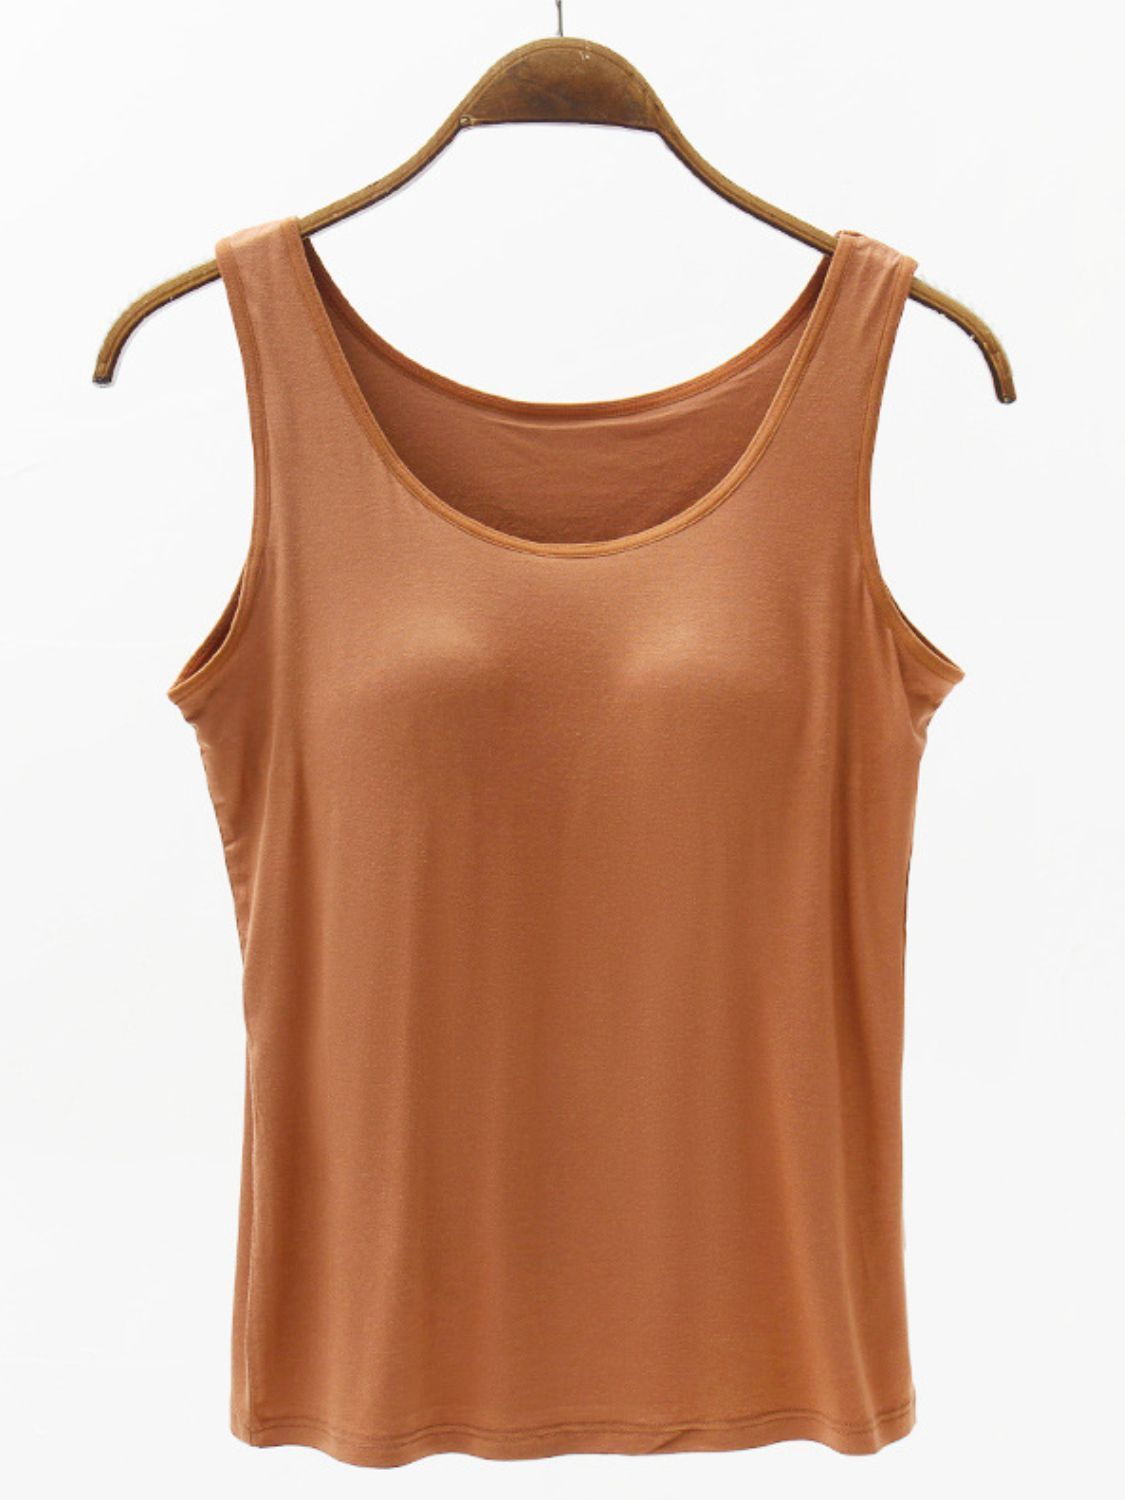 Wide Strap Tank with Built in Bra